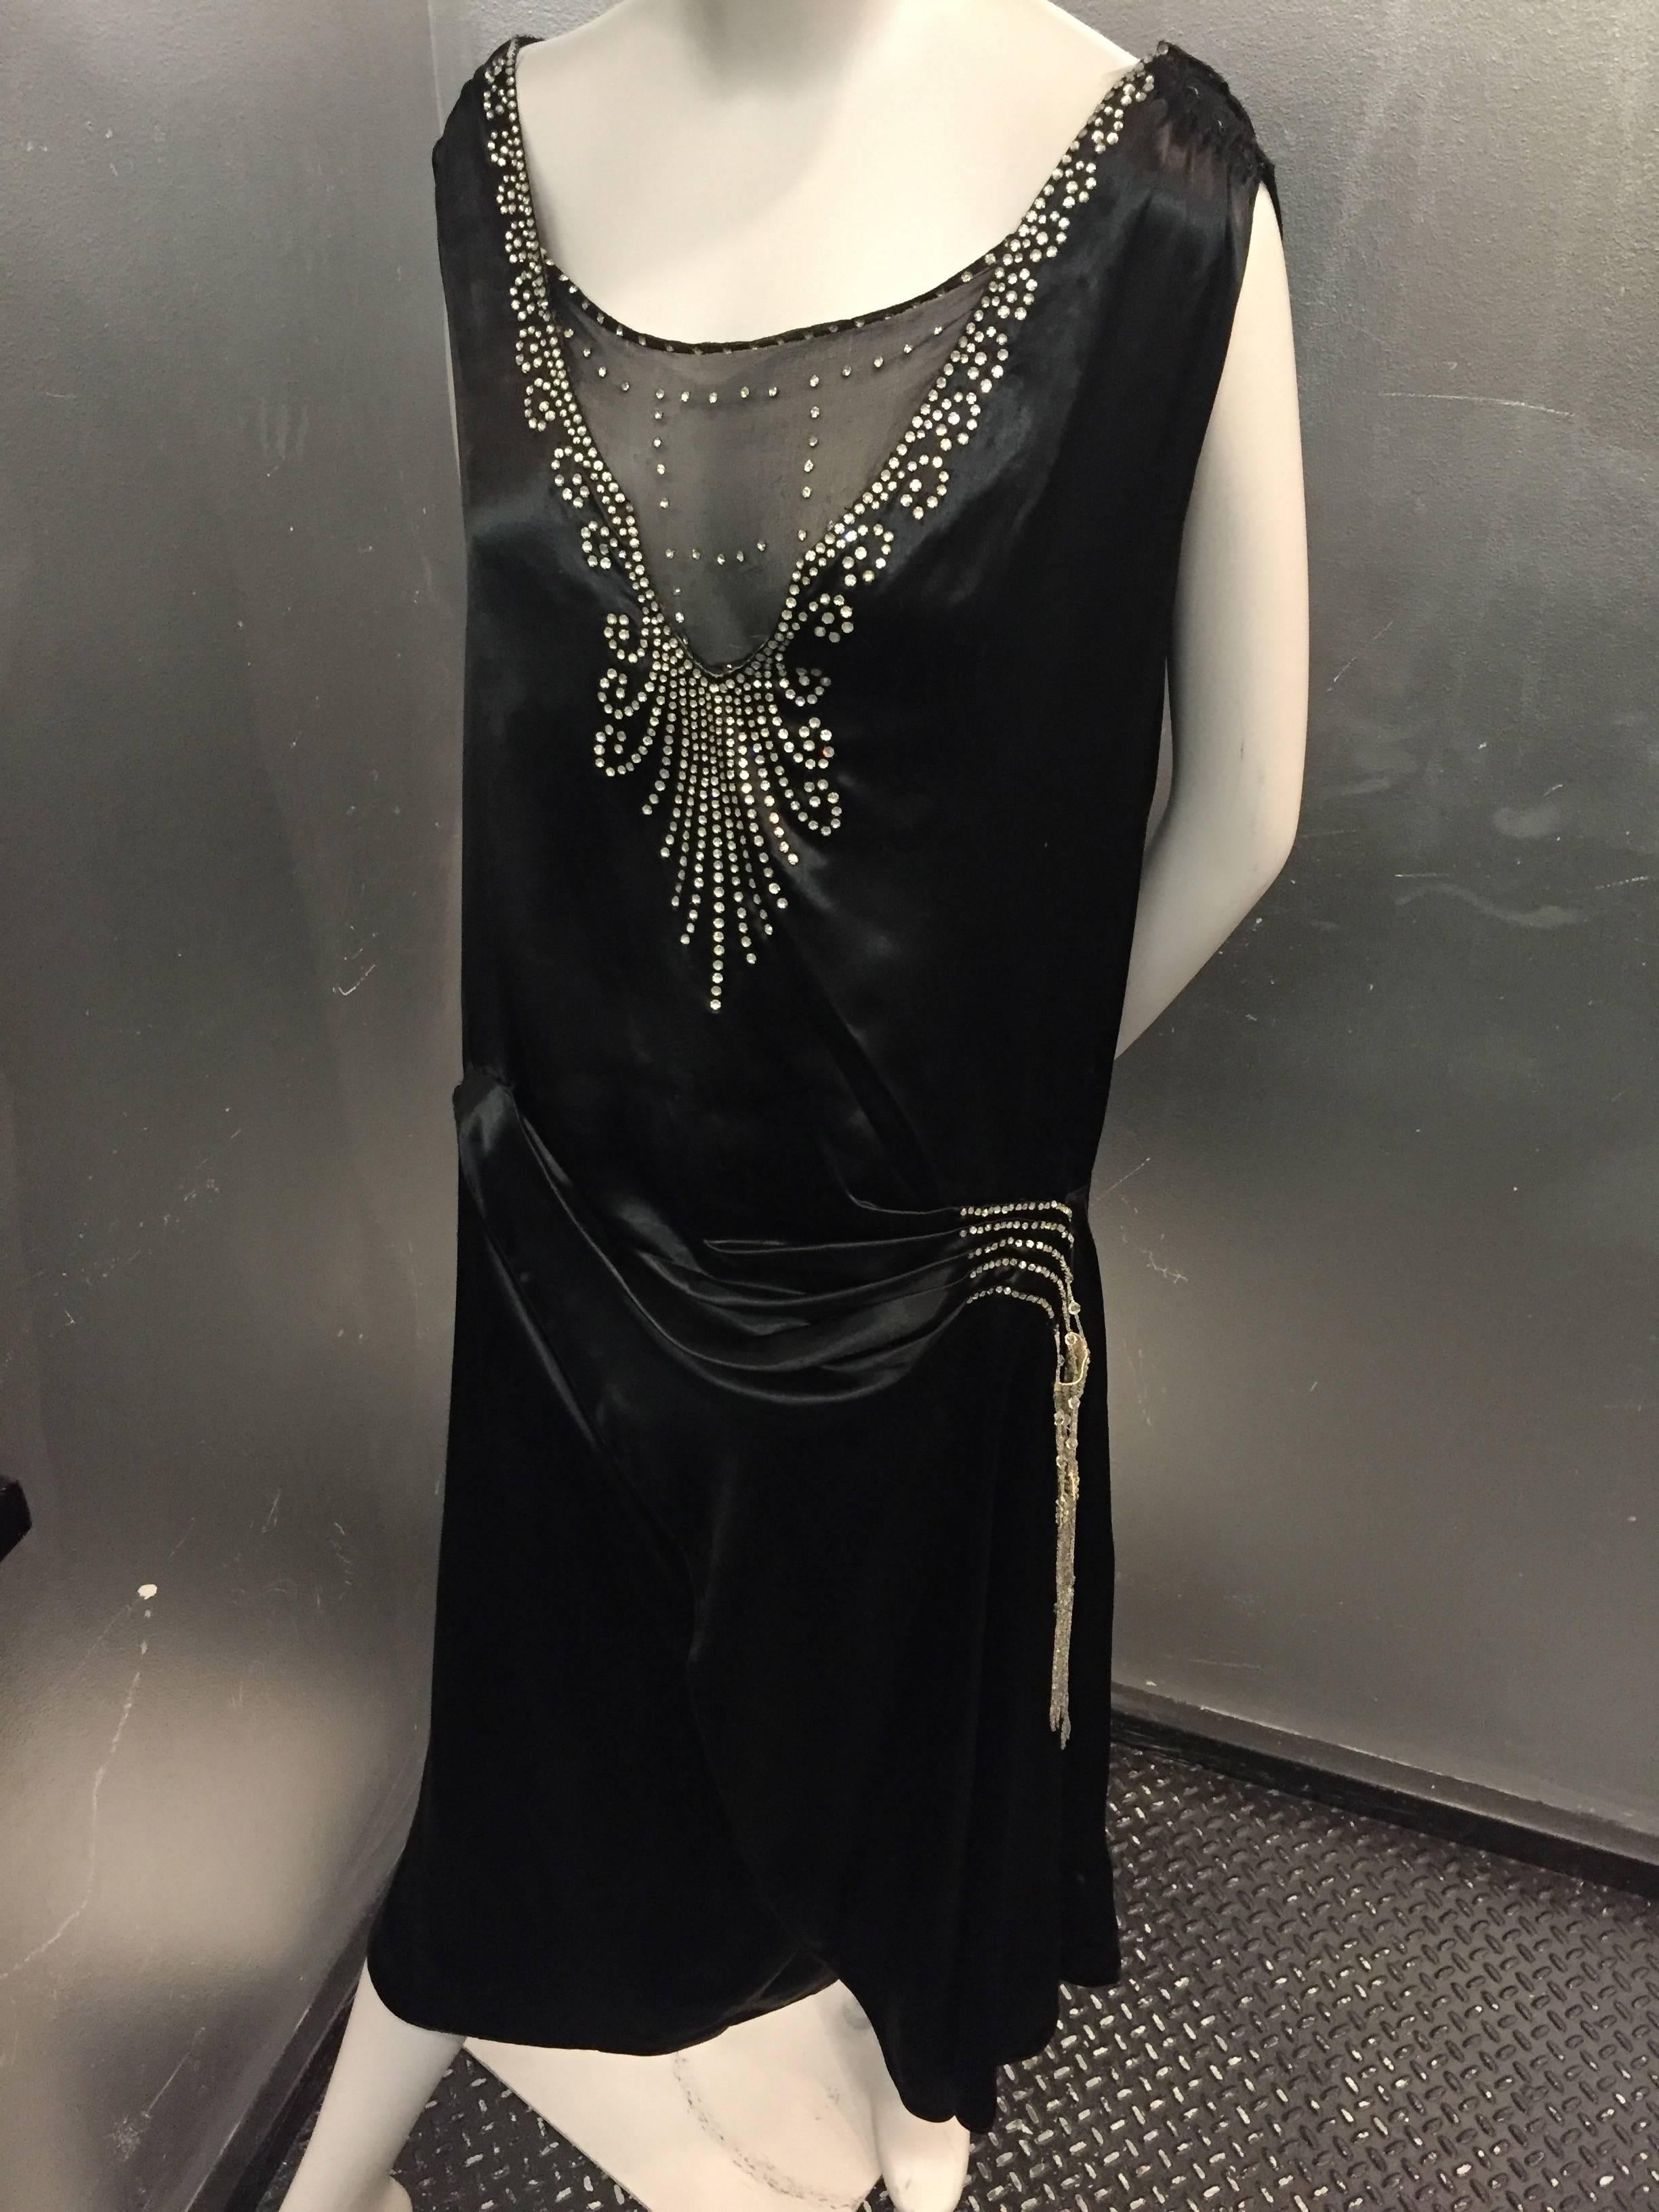 Women's 1920s Art Deco Black Silk Satin Gatsby-Style Dress with Sheer Panel and Jewels